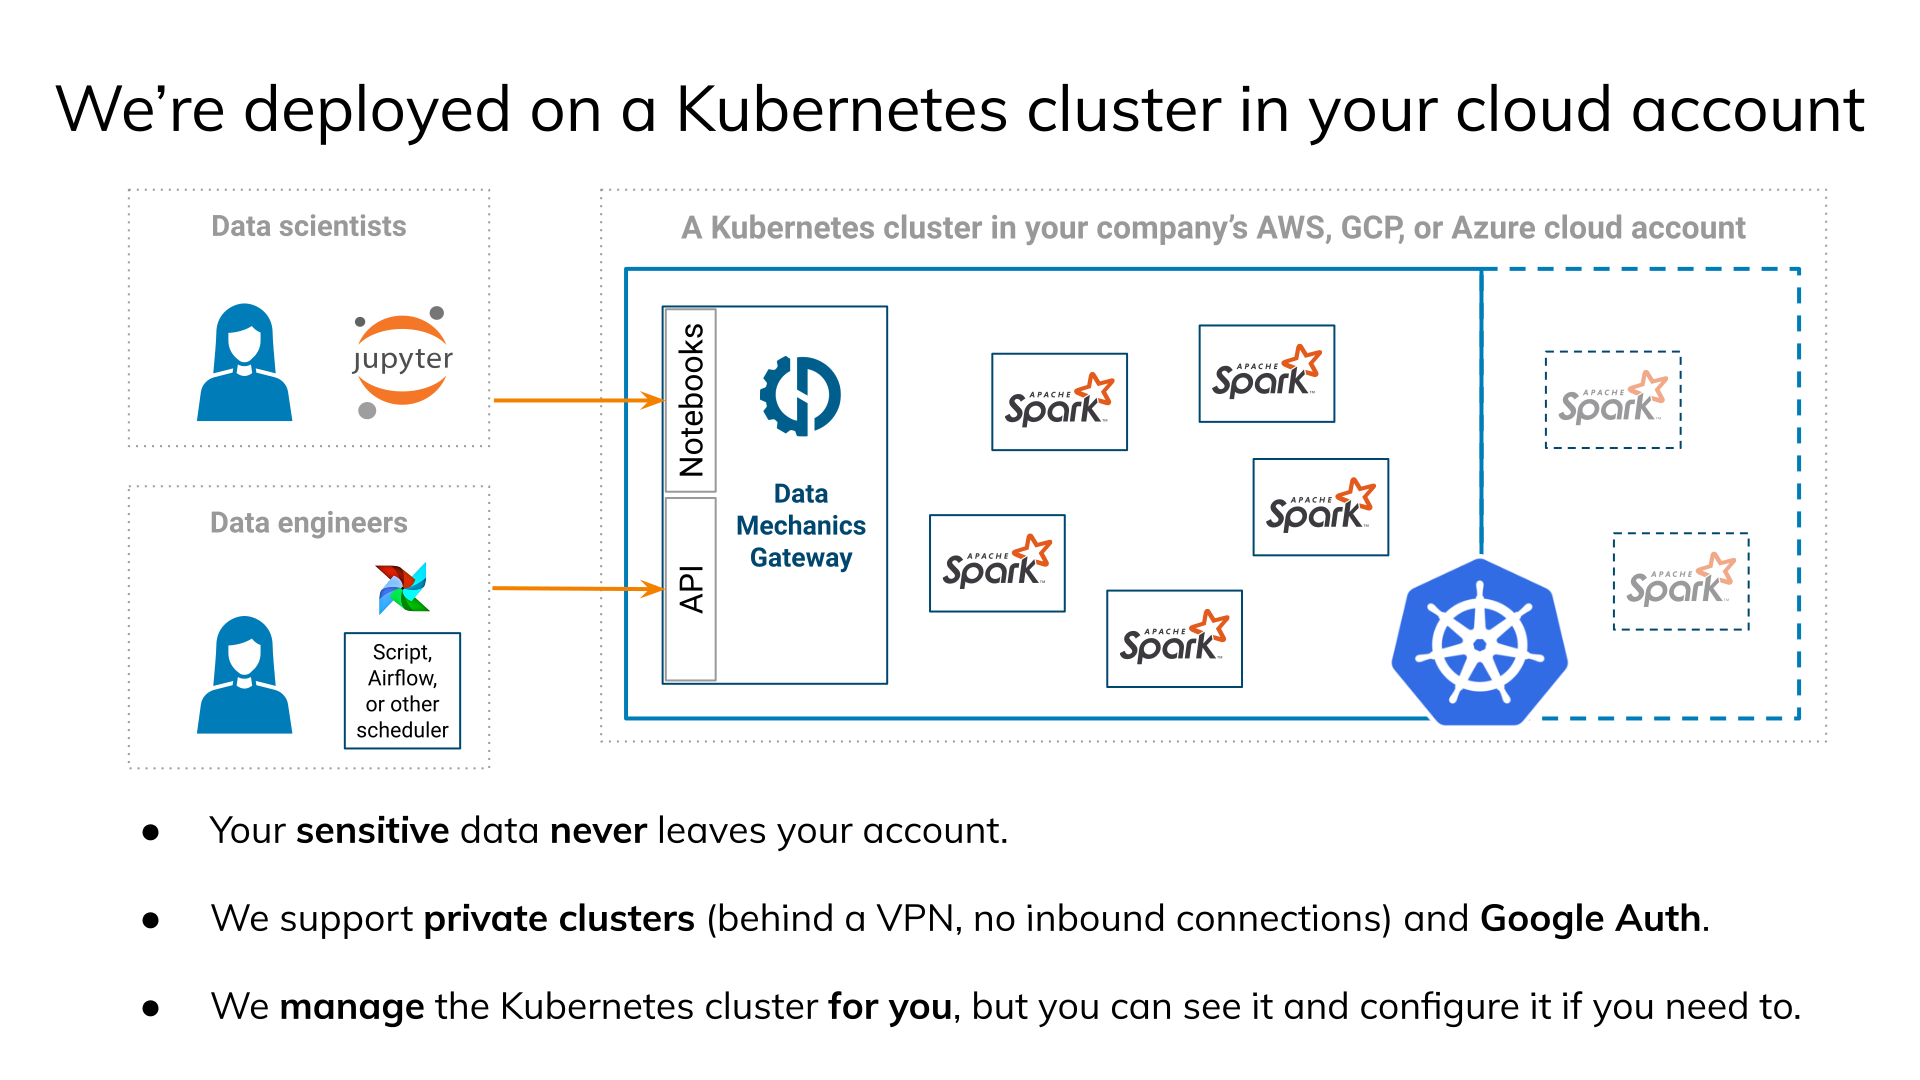 Deployment on a Kubernetes cluster